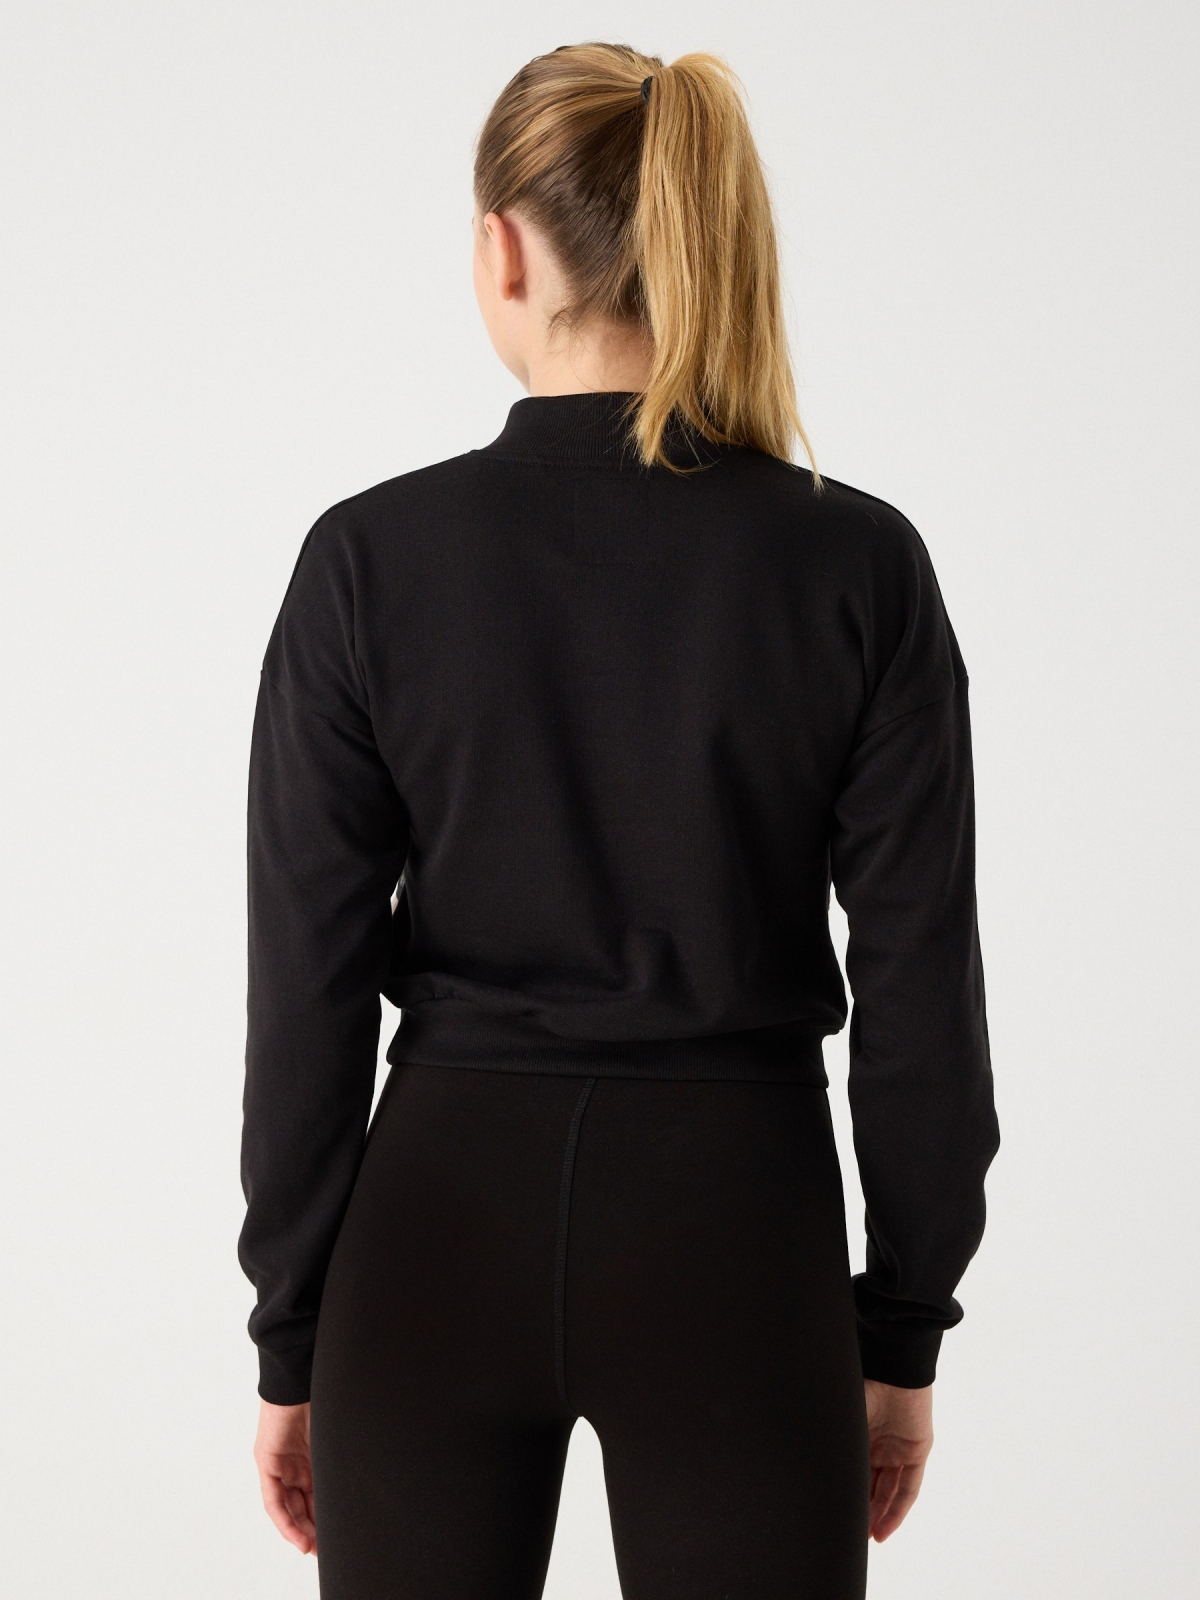 Cropped sweatshirt with zip black middle back view